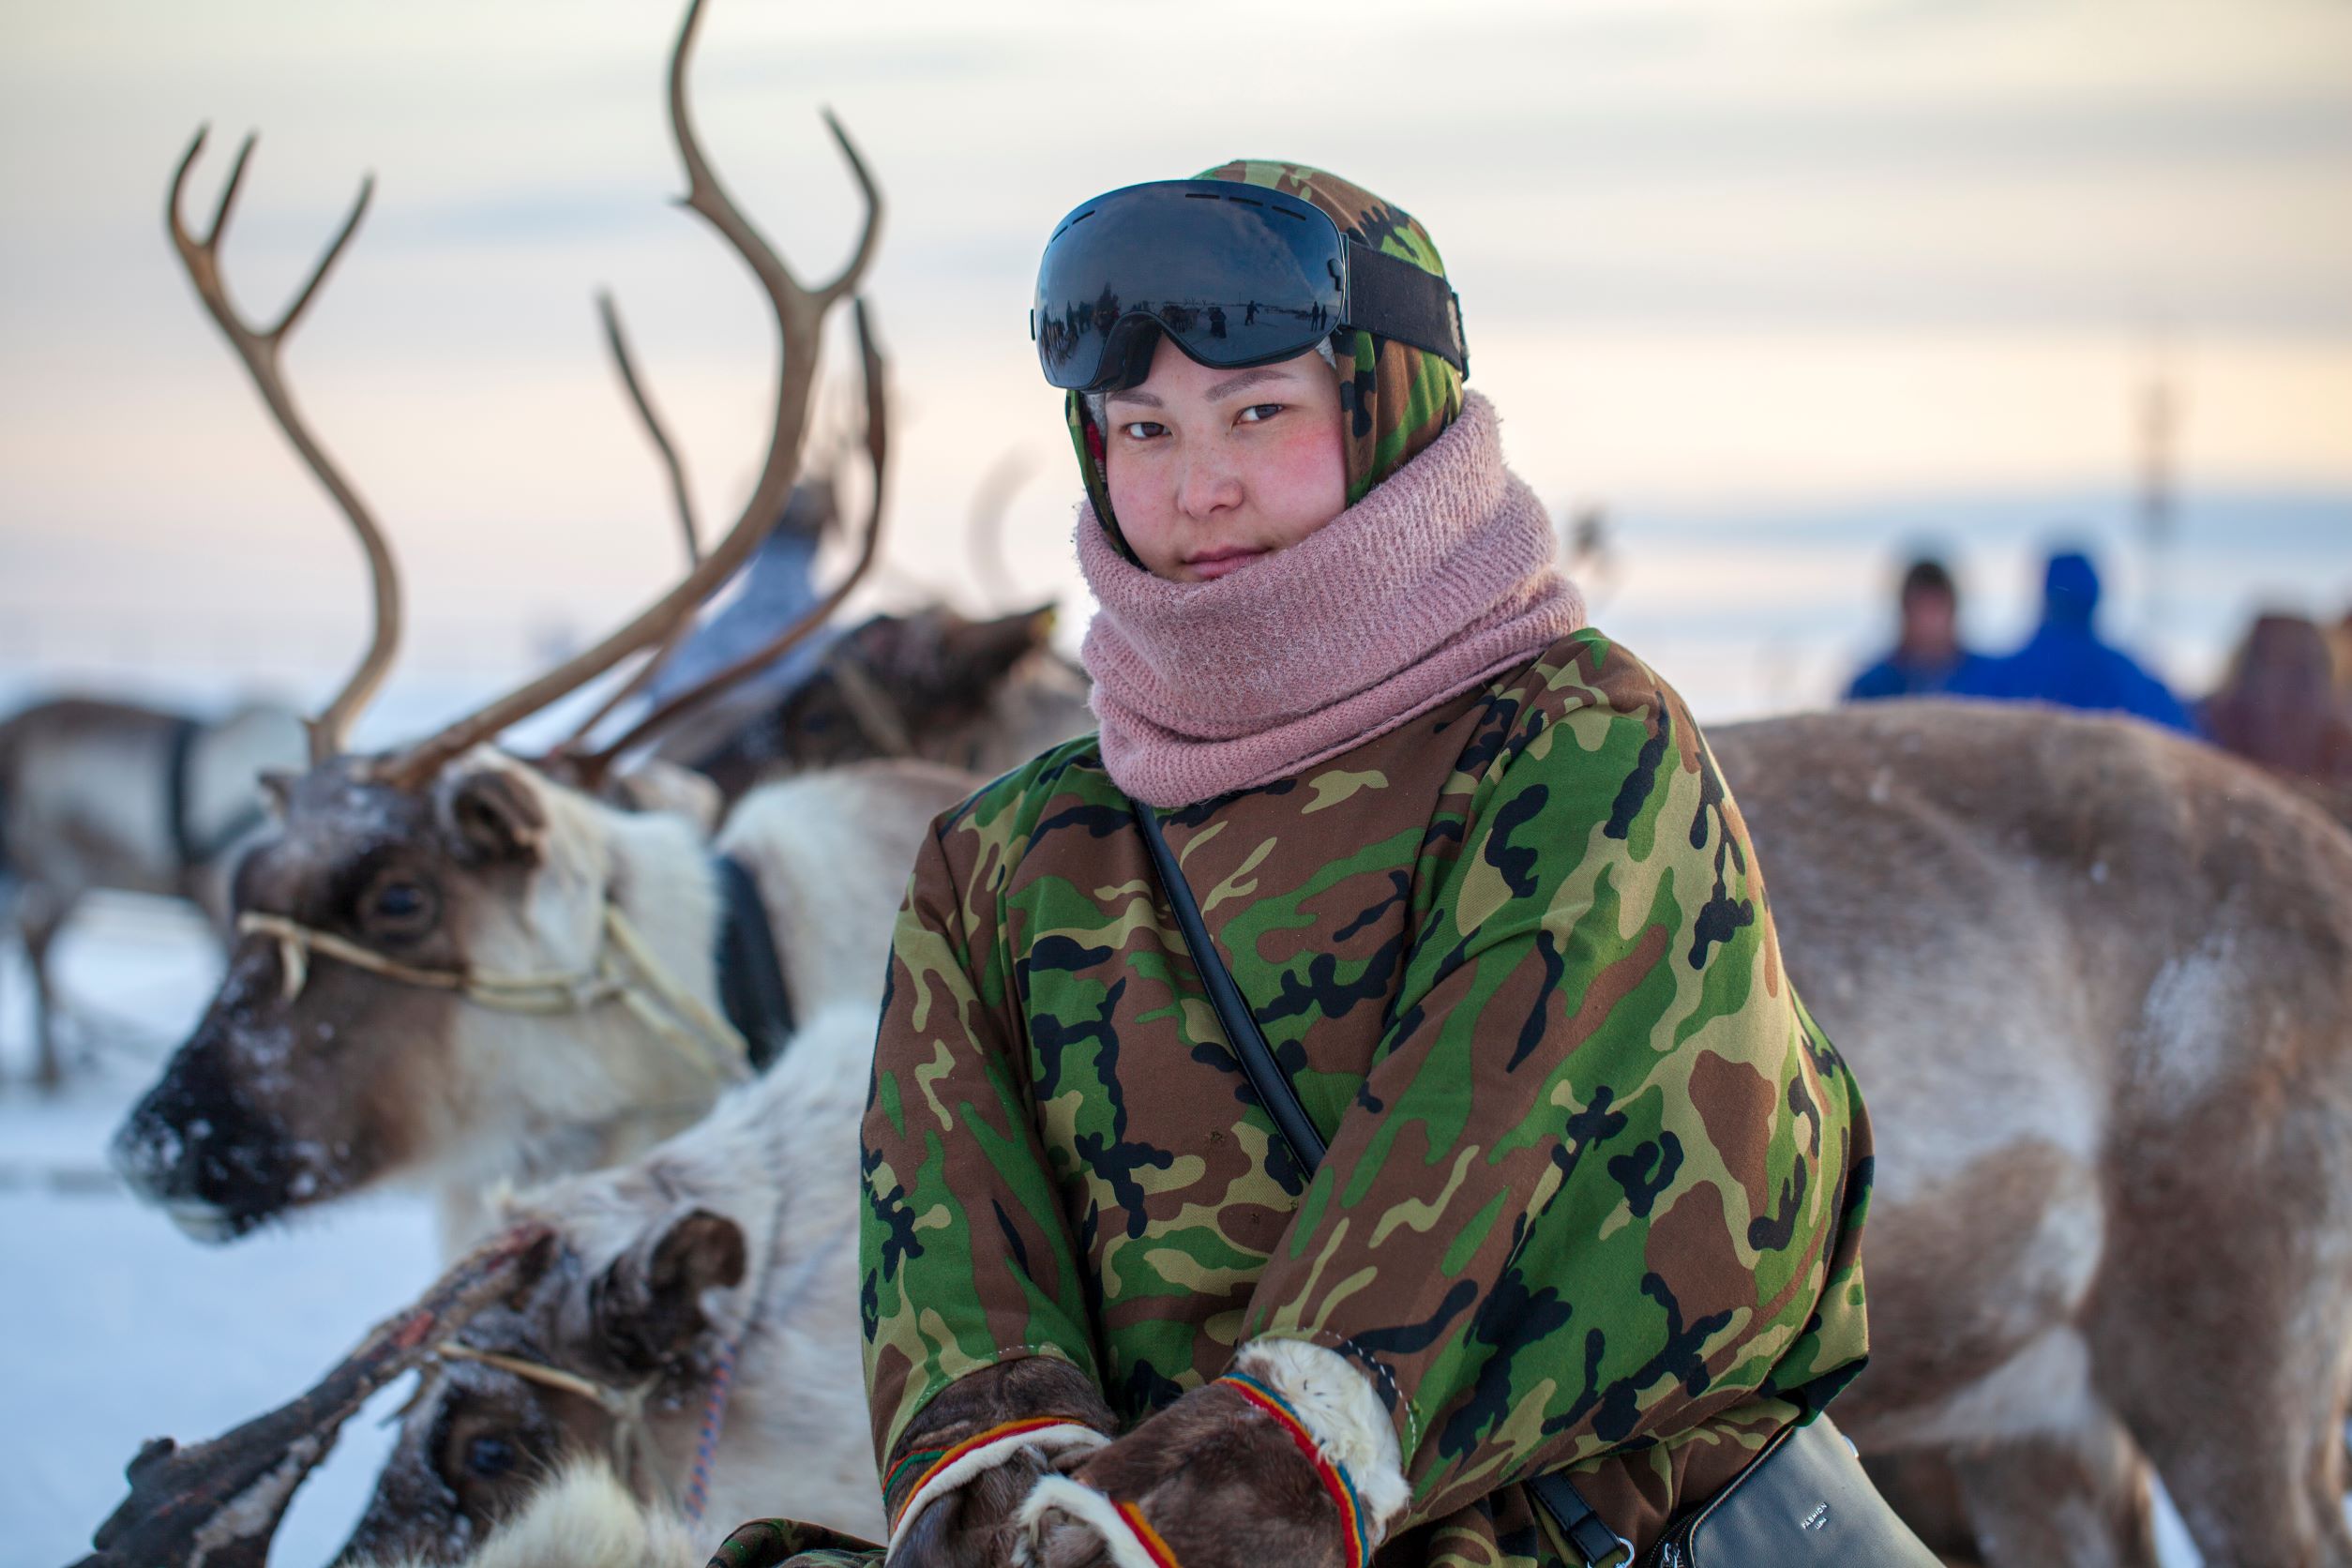 Indigenous Communities Lead Sustainable Change in the Arctic